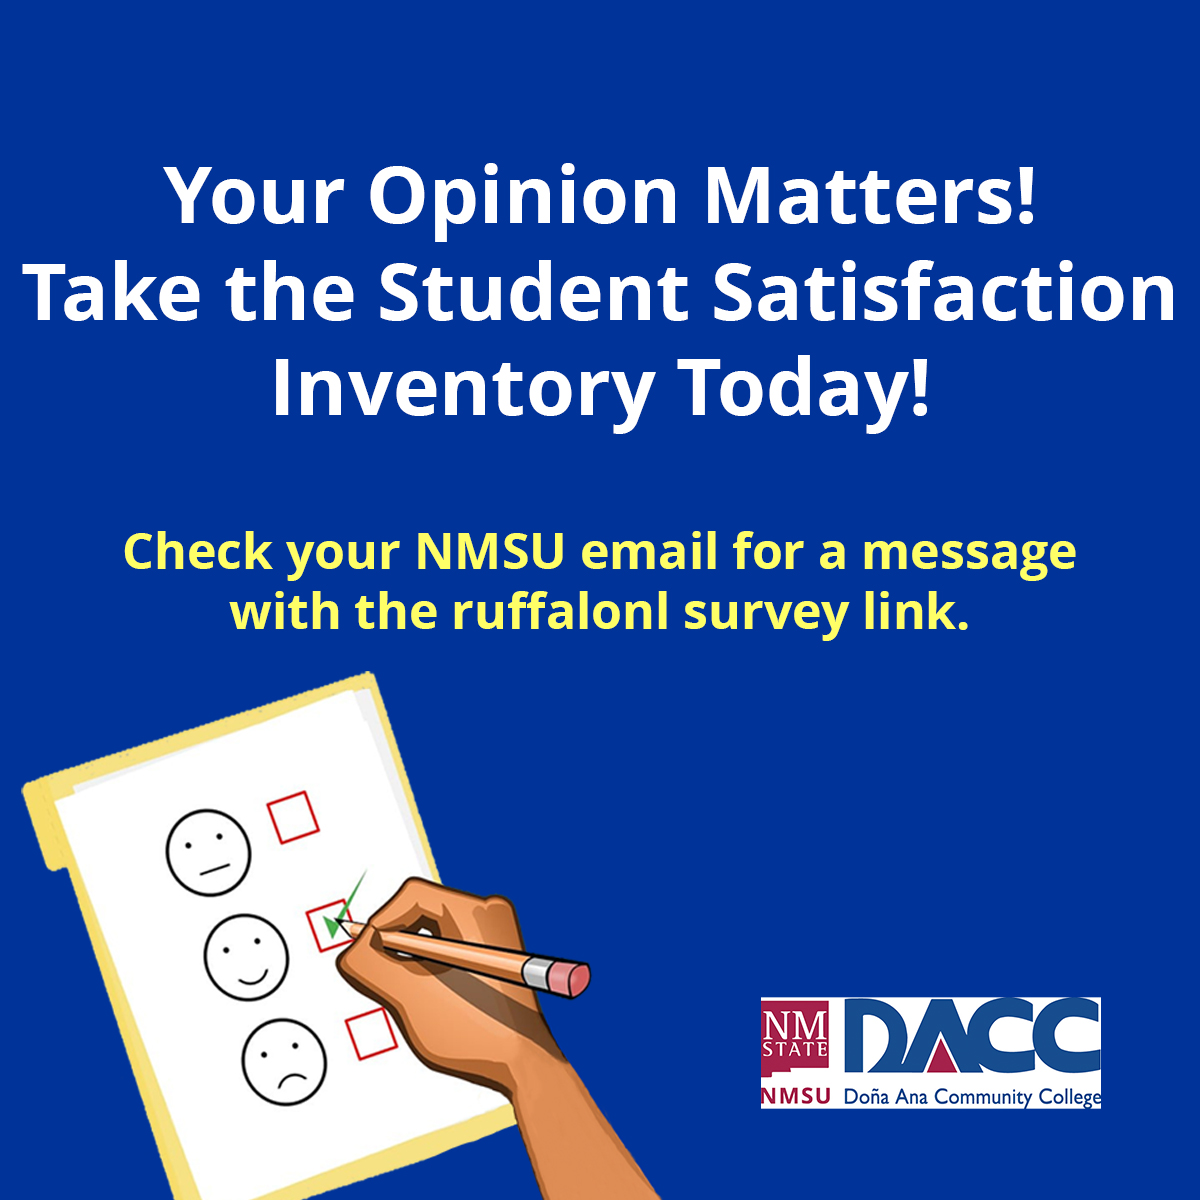 Your Opinion Matters! Take the Student Satisfaction Inventory Today! Check your NMSU email for a message with the ruffalonl survey link. Once you've completed the survey, you'll have the chance to win movie passes in our weekly giveaway. #WeAreDACC